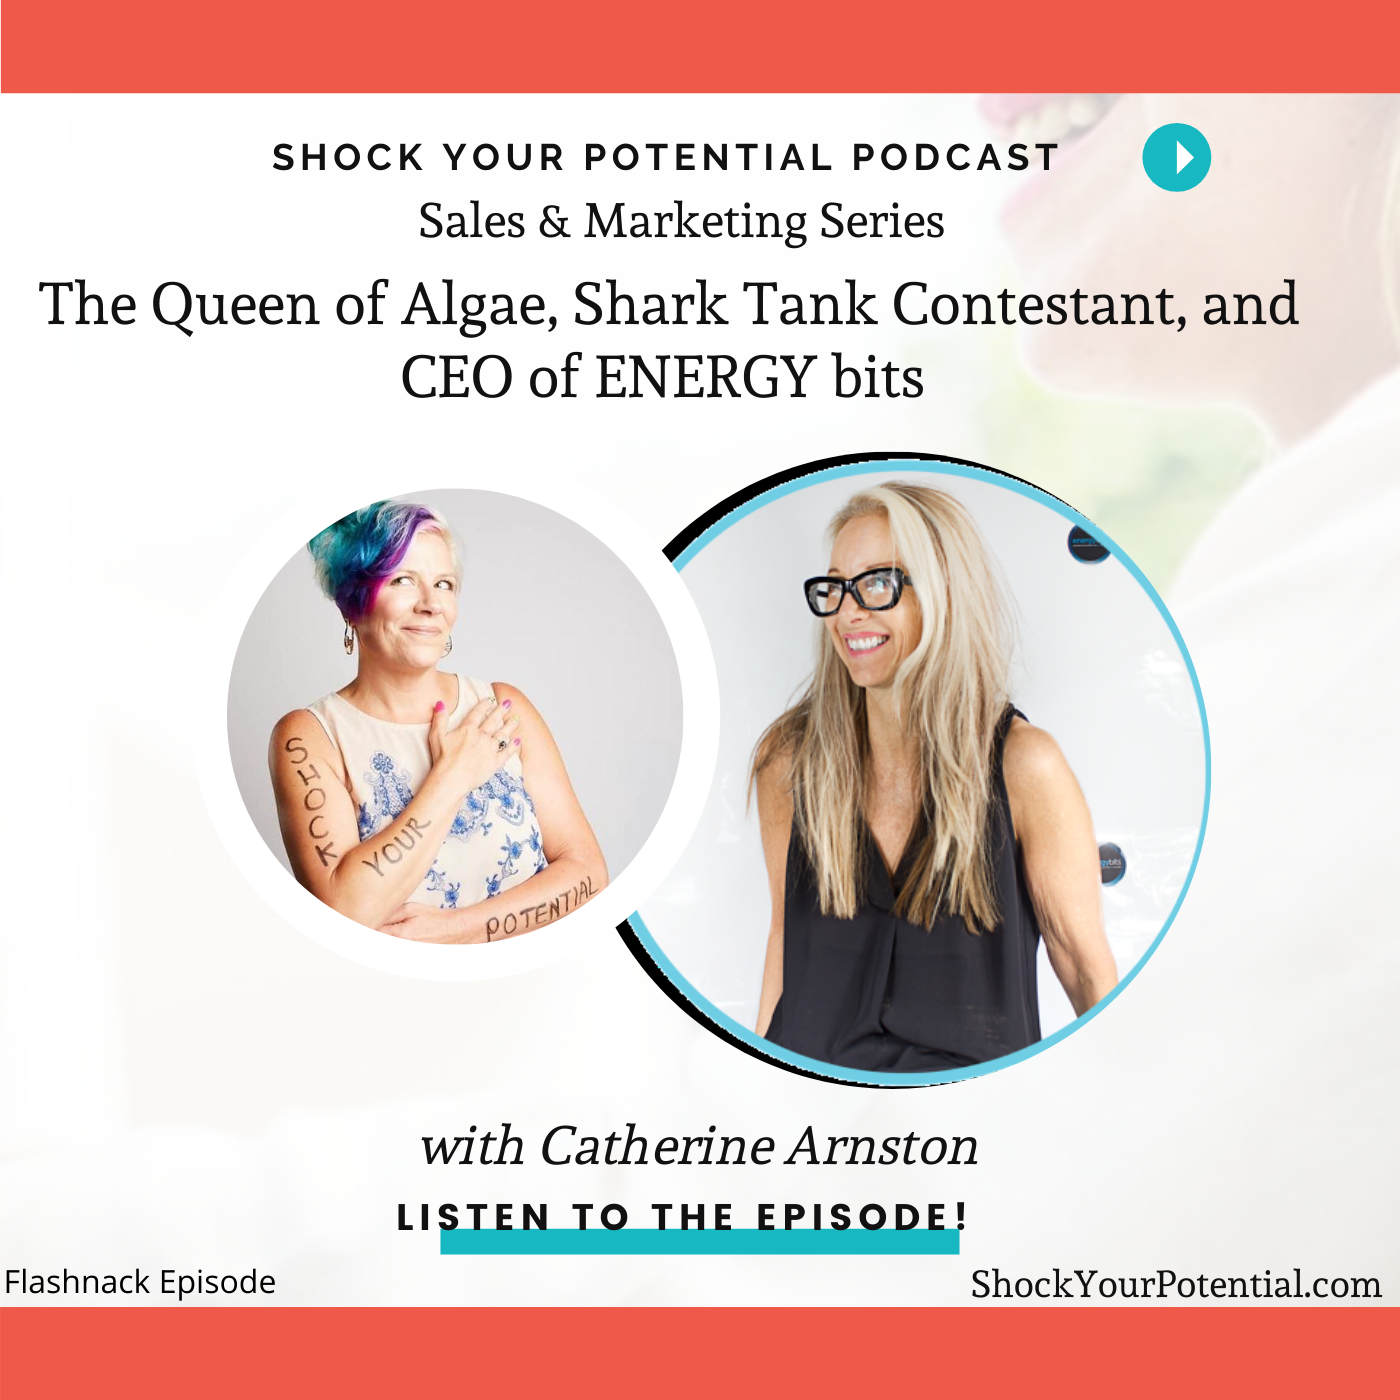 The Queen of Algae, Shark Tank Contestant, and CEO of ENERGY bits  – Catherine Arnston